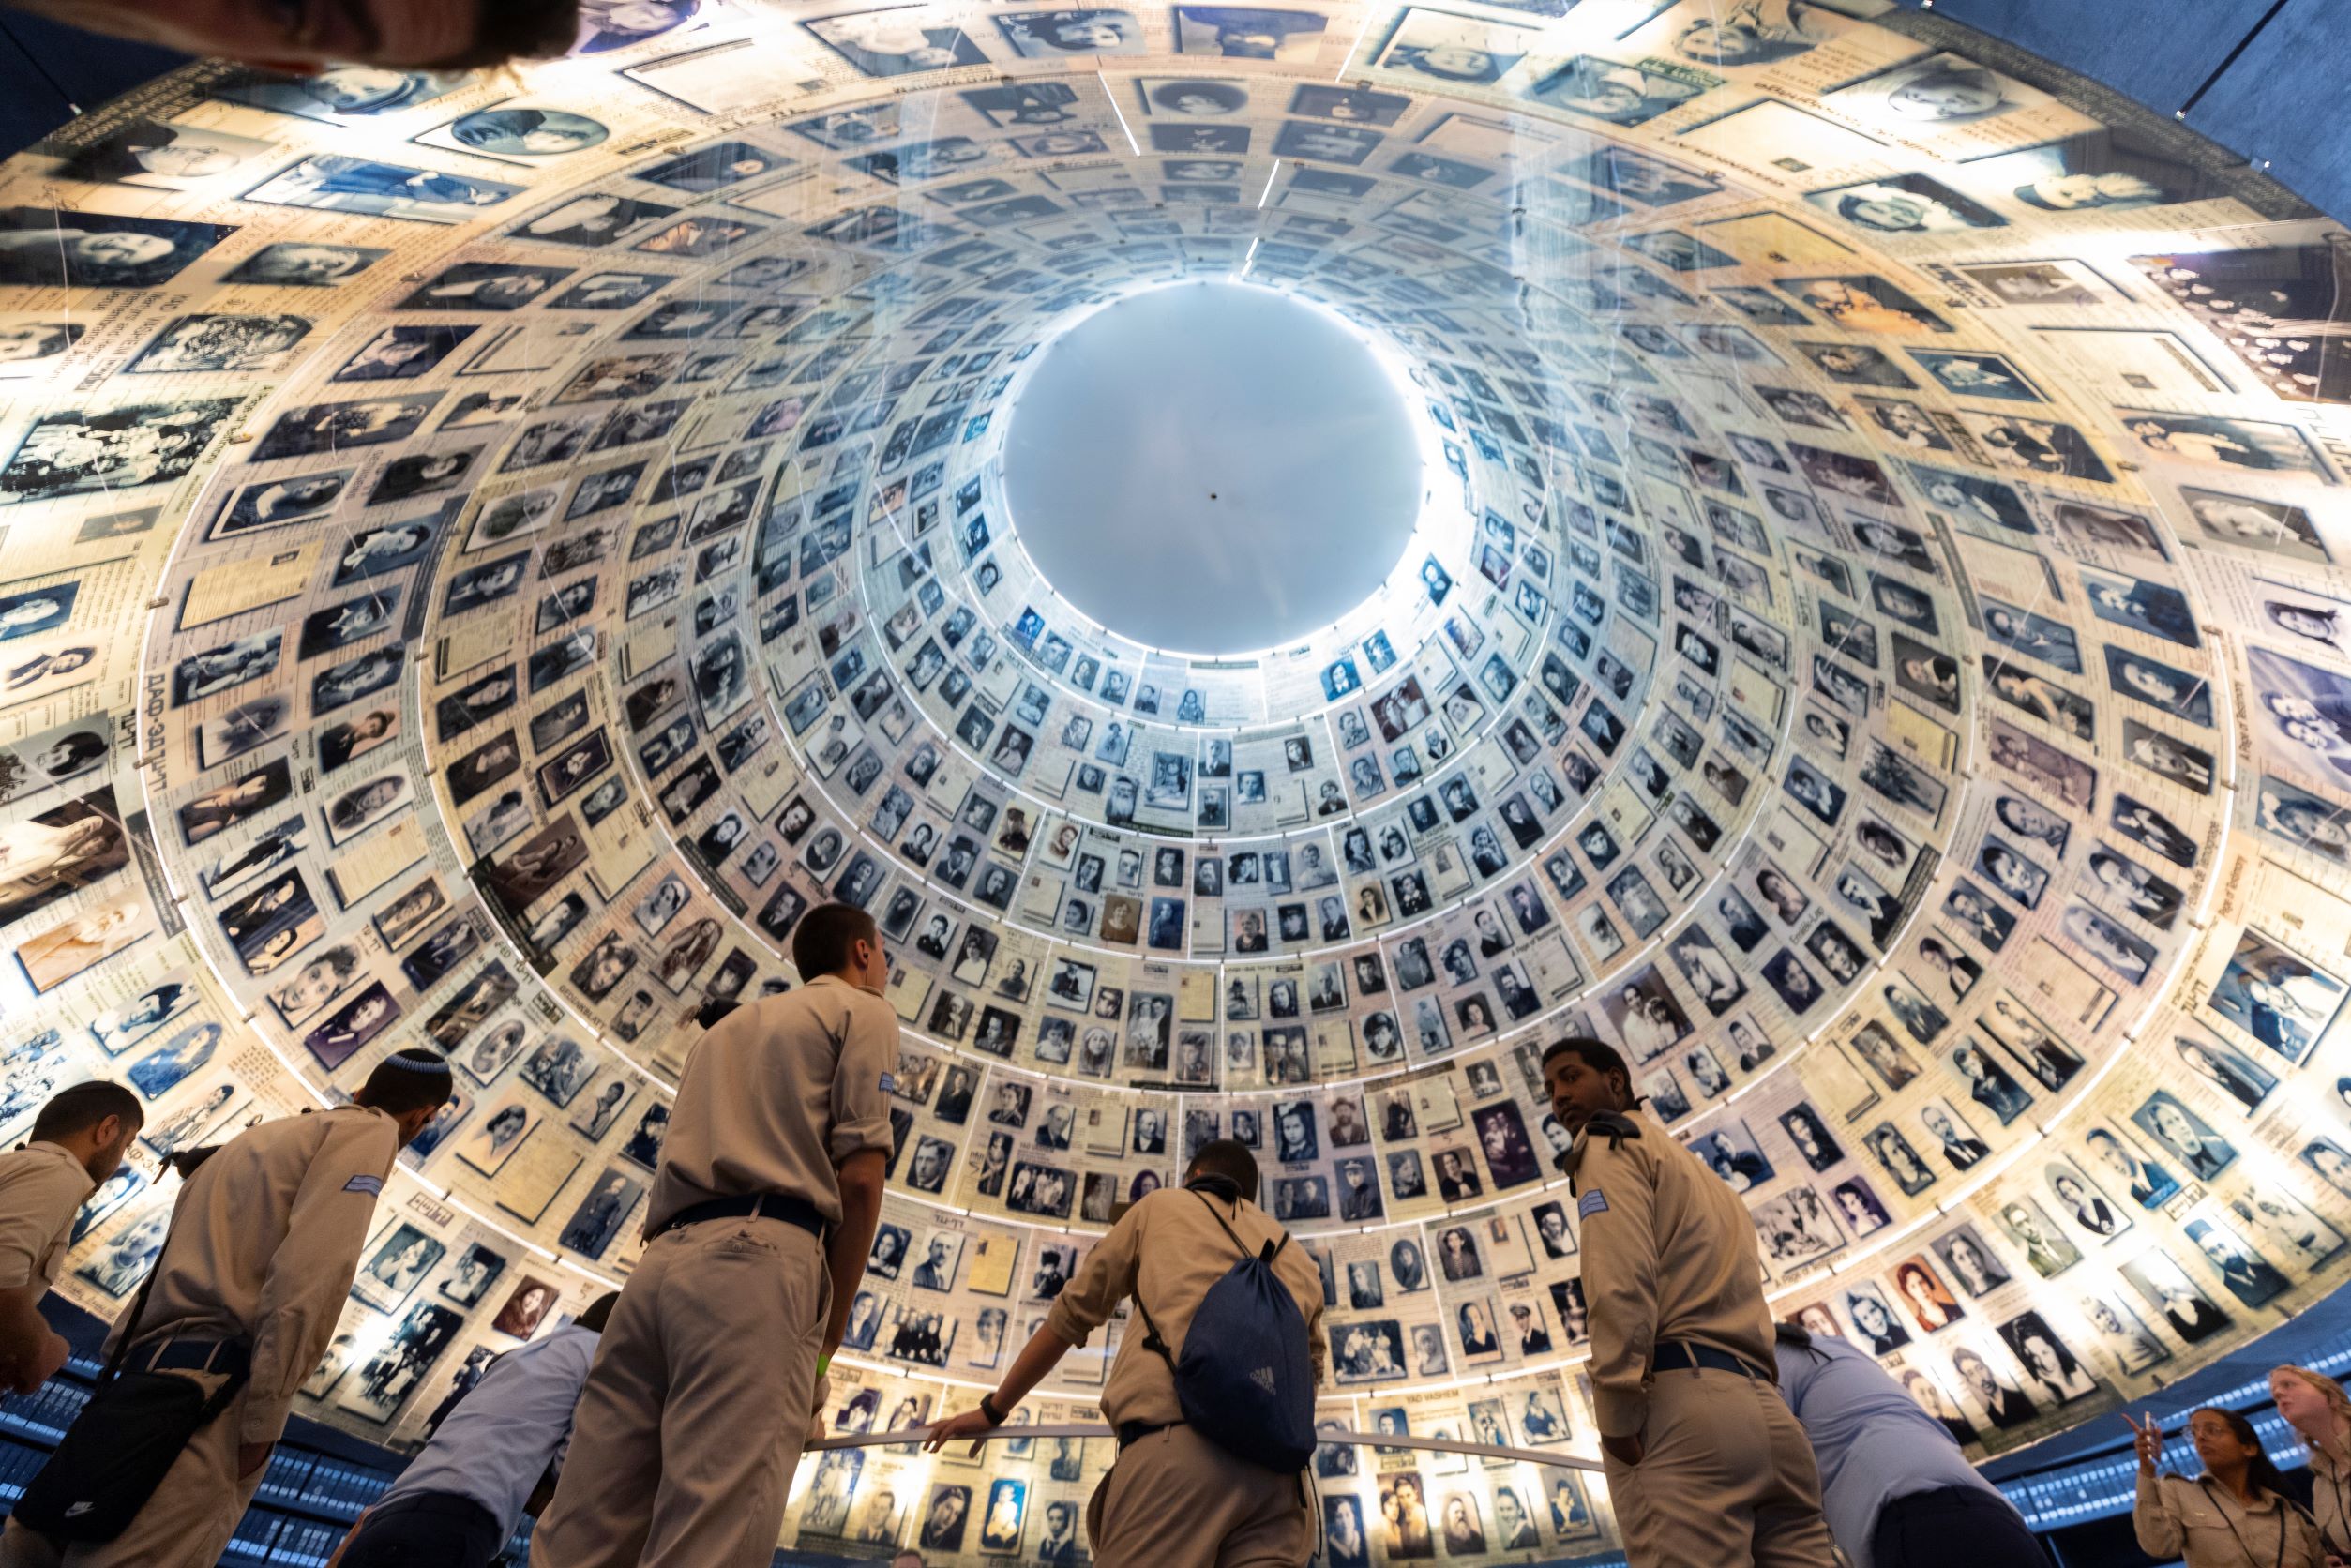 Visitors seen at the Yad Vashem Holocaust Memorial museum in Jerusalem on April 26, 2022, ahead of Israeli Holocaust Remembrance Day. (Olivier Fitoussi/Flash90)